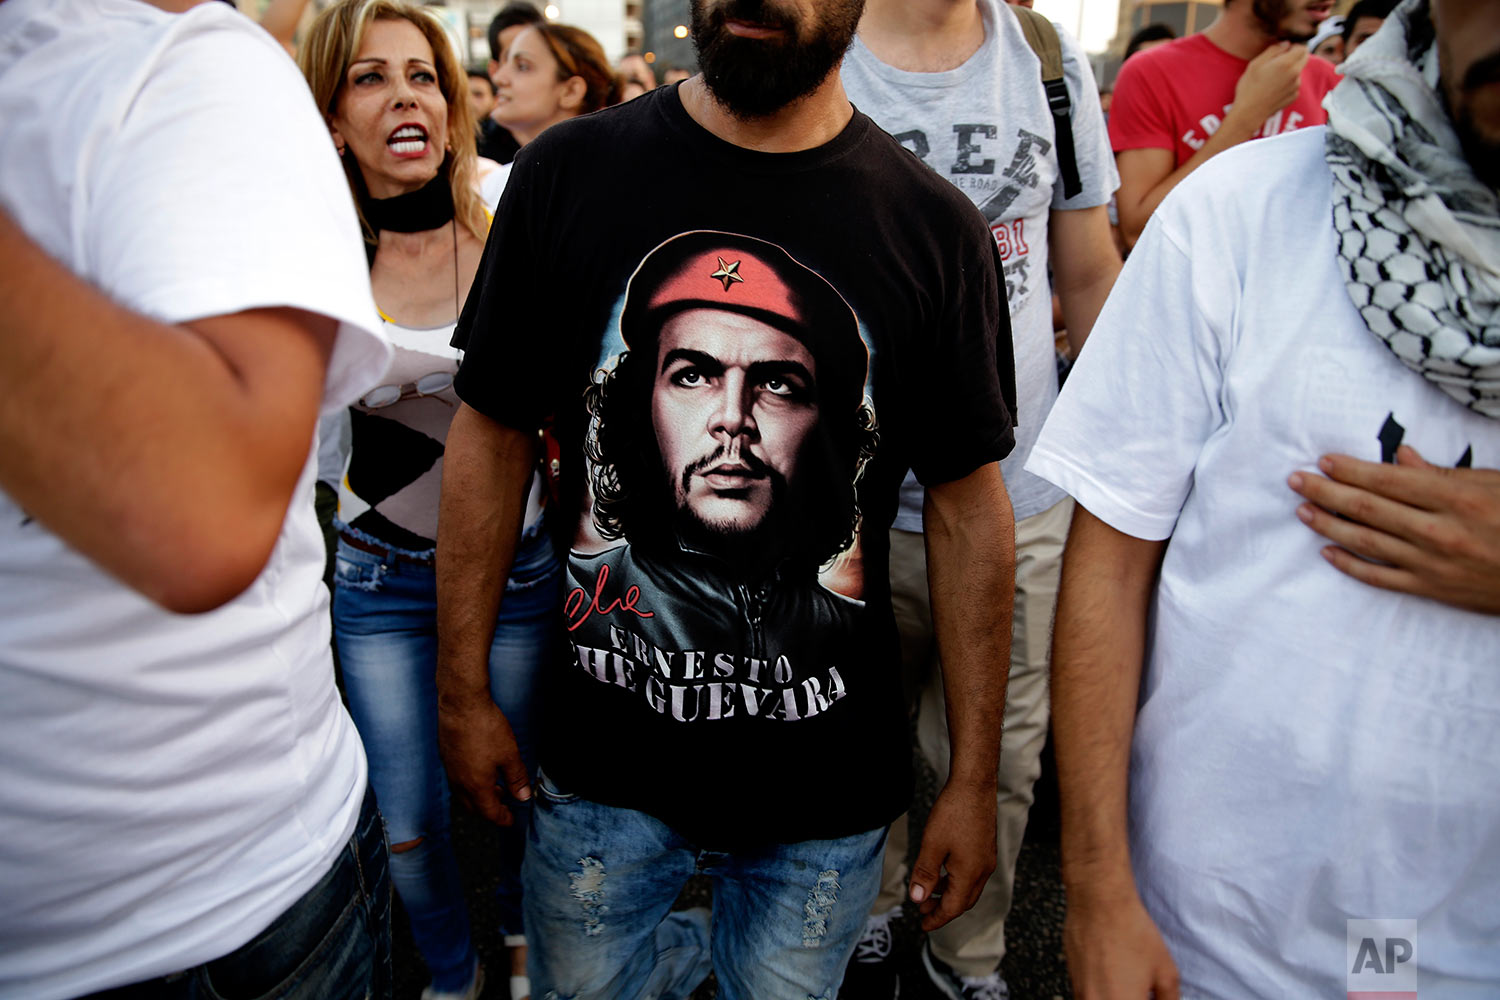  A Lebanese activist wears a portrait of ''Che Guevara'' as others chant slogans during a protest against the trash crisis and government corruption, in downtown Beirut, Lebanon, Wednesday, Aug. 26, 2015. (AP Photo/Hassan Ammar) 